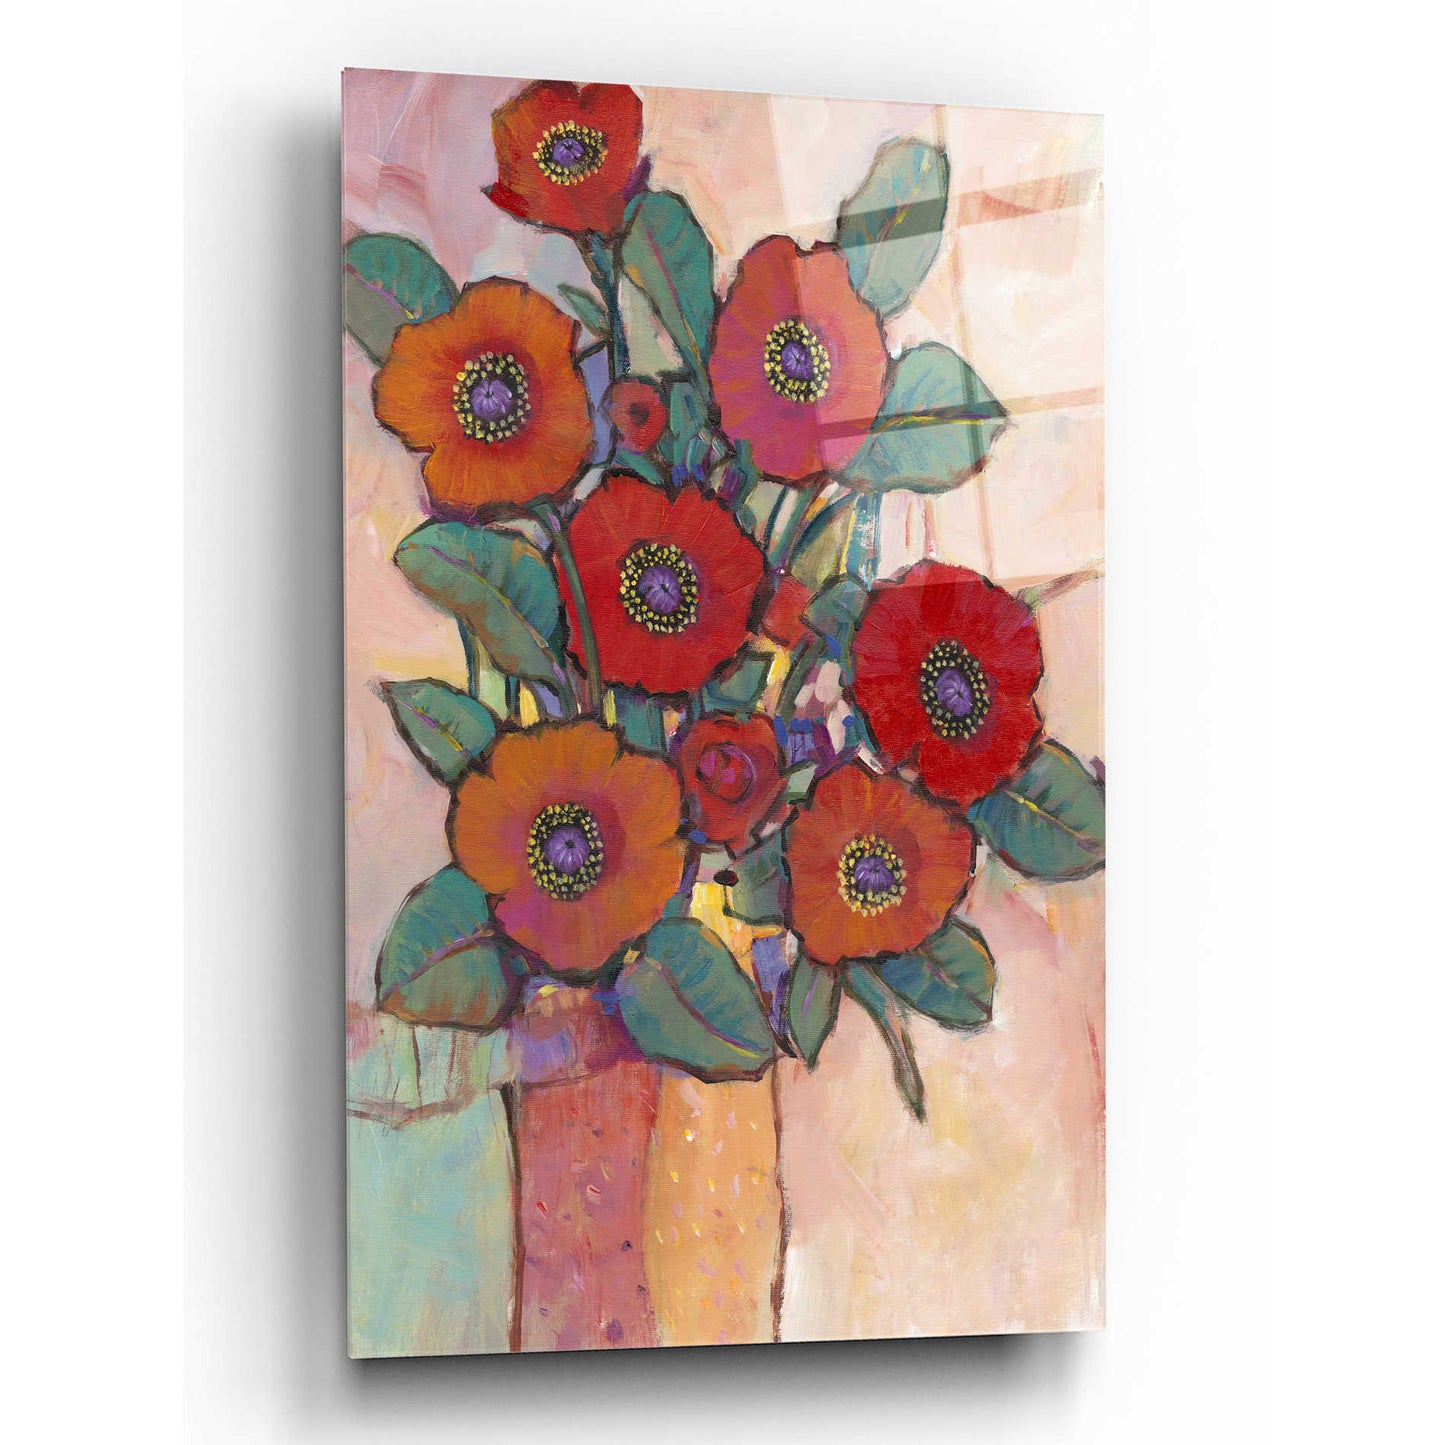 Epic Art 'Poppies in a Vase I' by Tim O'Toole, Acrylic Glass Wall Art